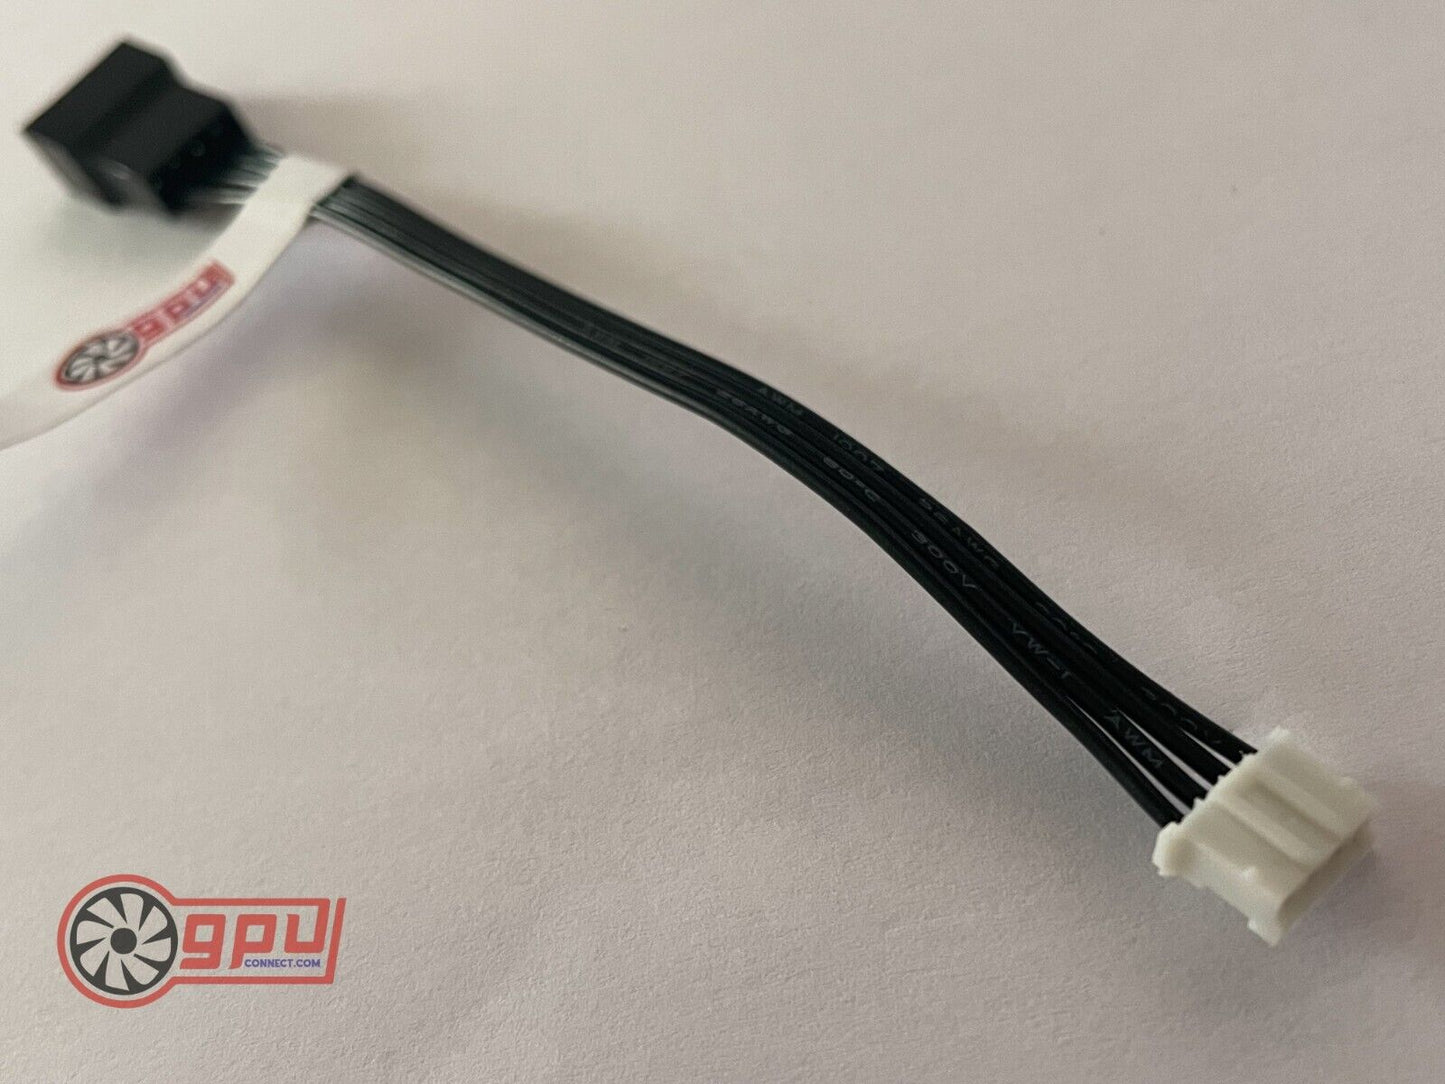 PH2.0 Mini 4Pin to PWM Fan GPU Graphics Cards Adapter Cable - 10cm (Black) - GPUCONNECT.COM